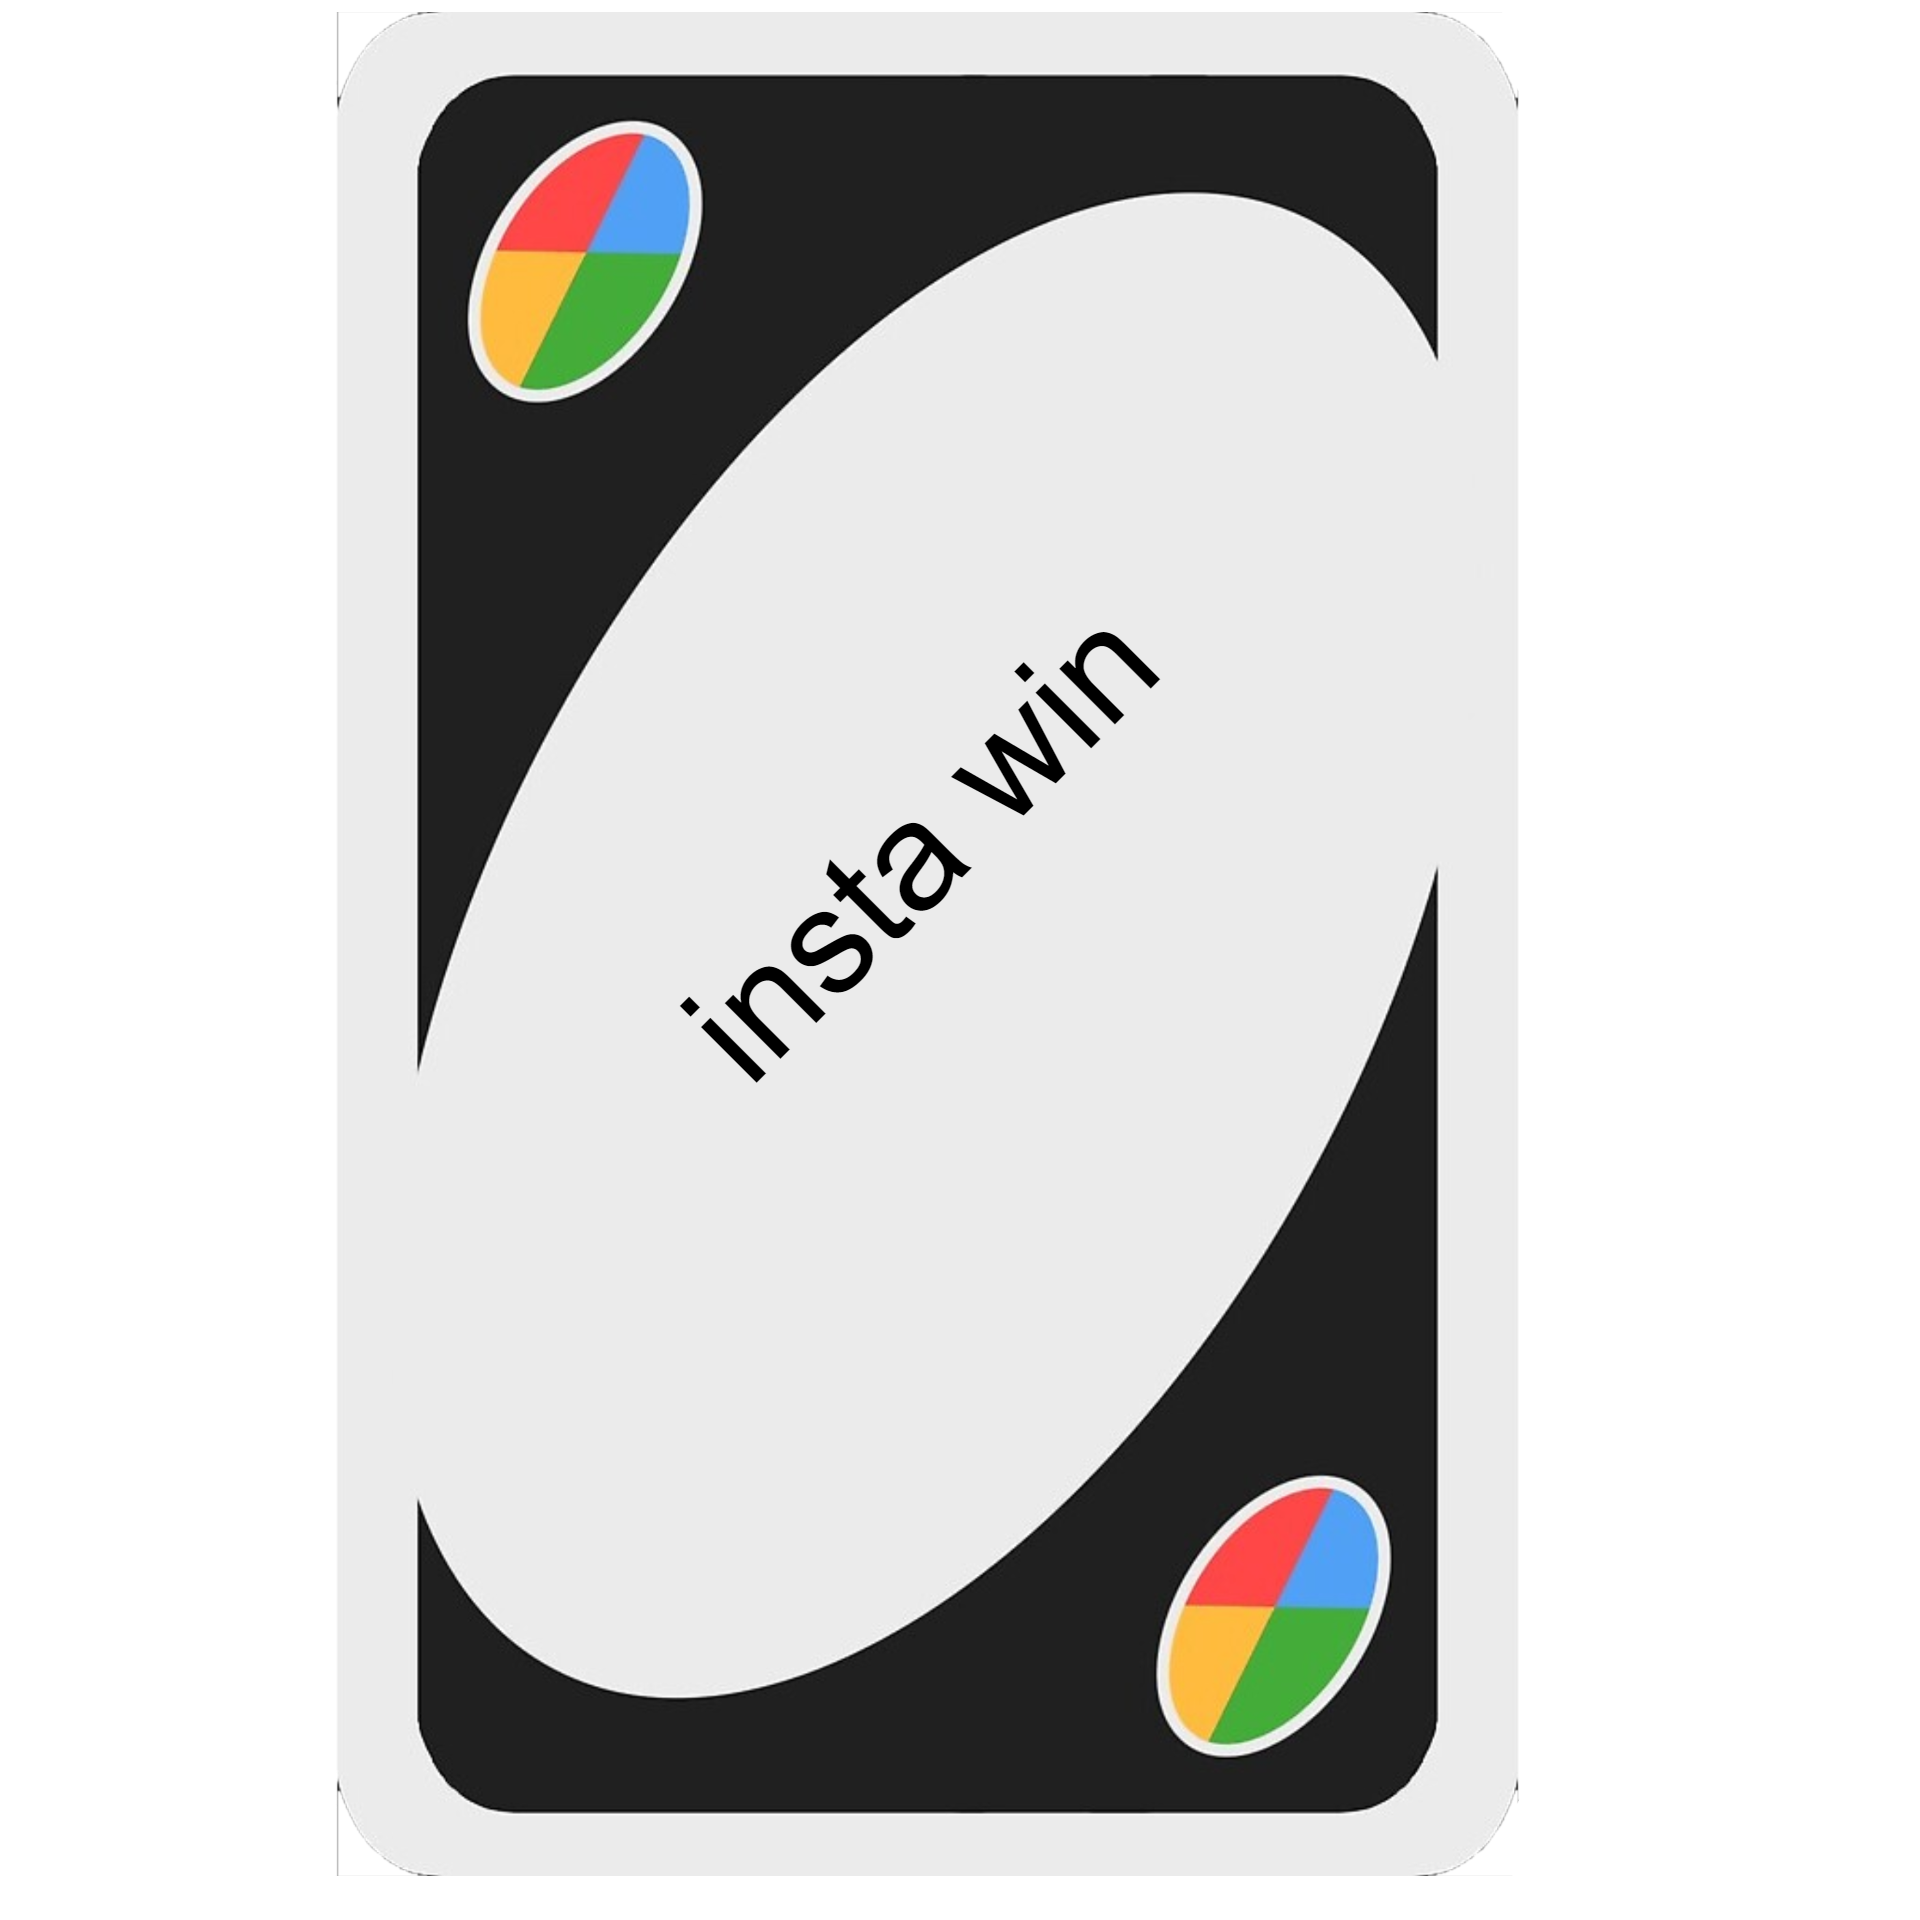 Jump-In, Uno Wiki